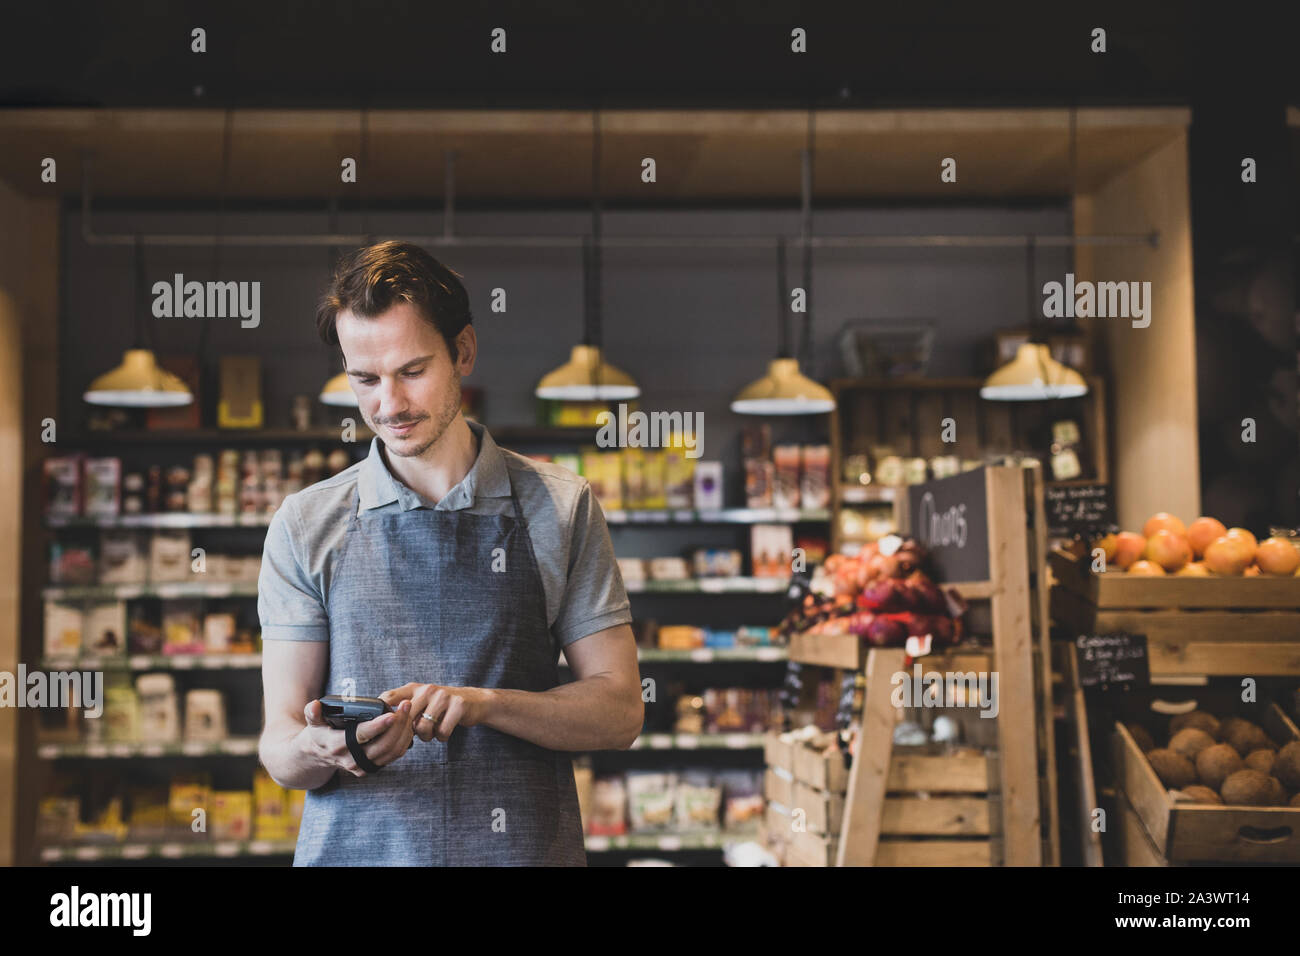 Sales assistant in food market using a scanner Stock Photo